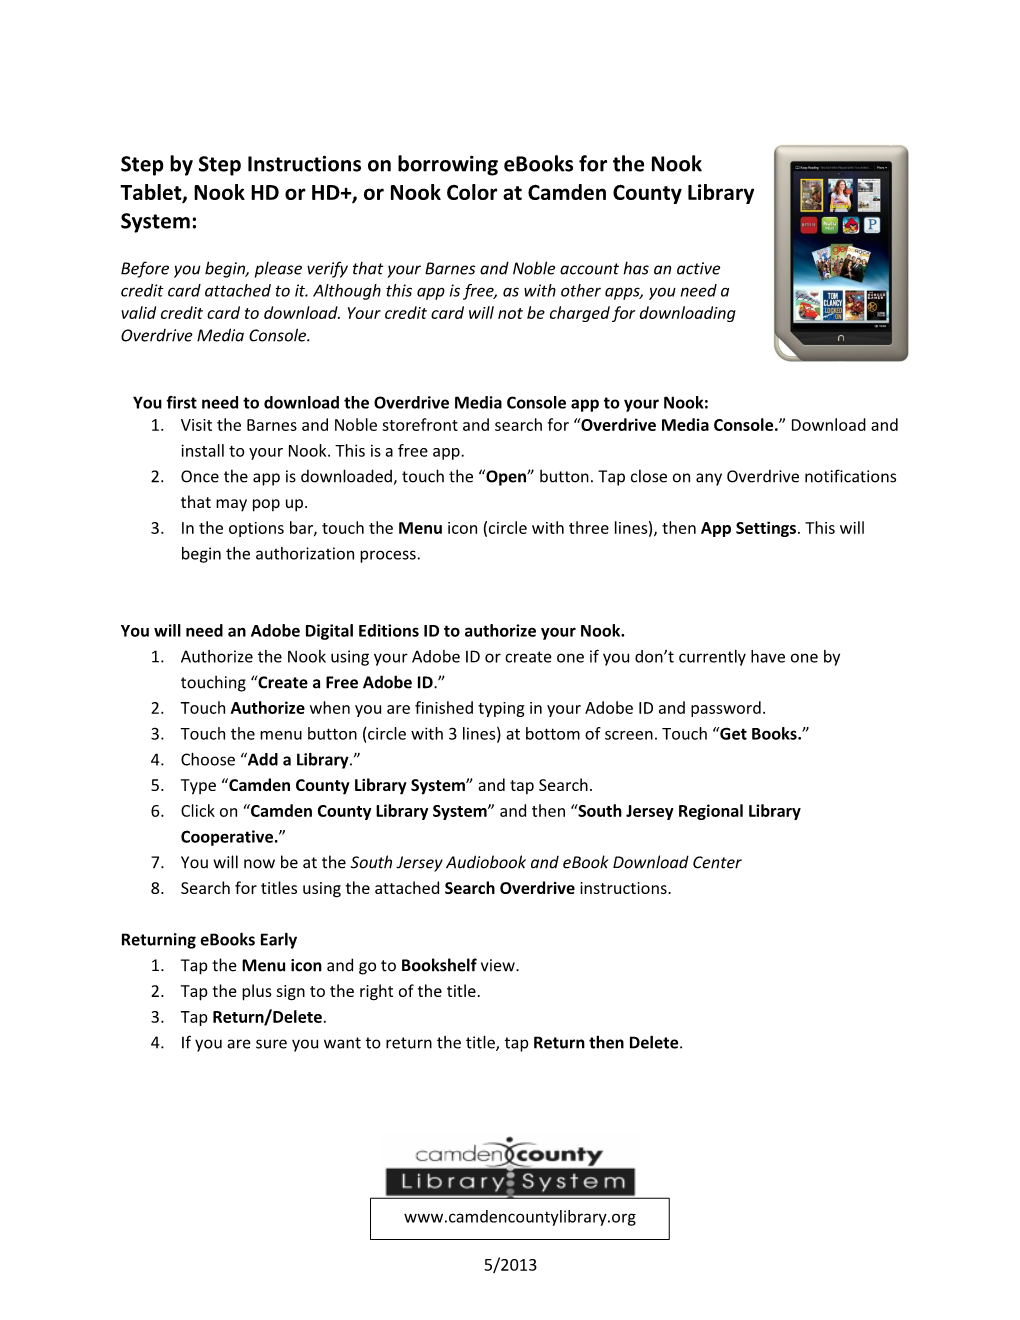 Step by Step Instructions on Borrowing Ebooks for the Nook Tablet, Nook HD Or HD+, Or Nook Color at Camden County Library System